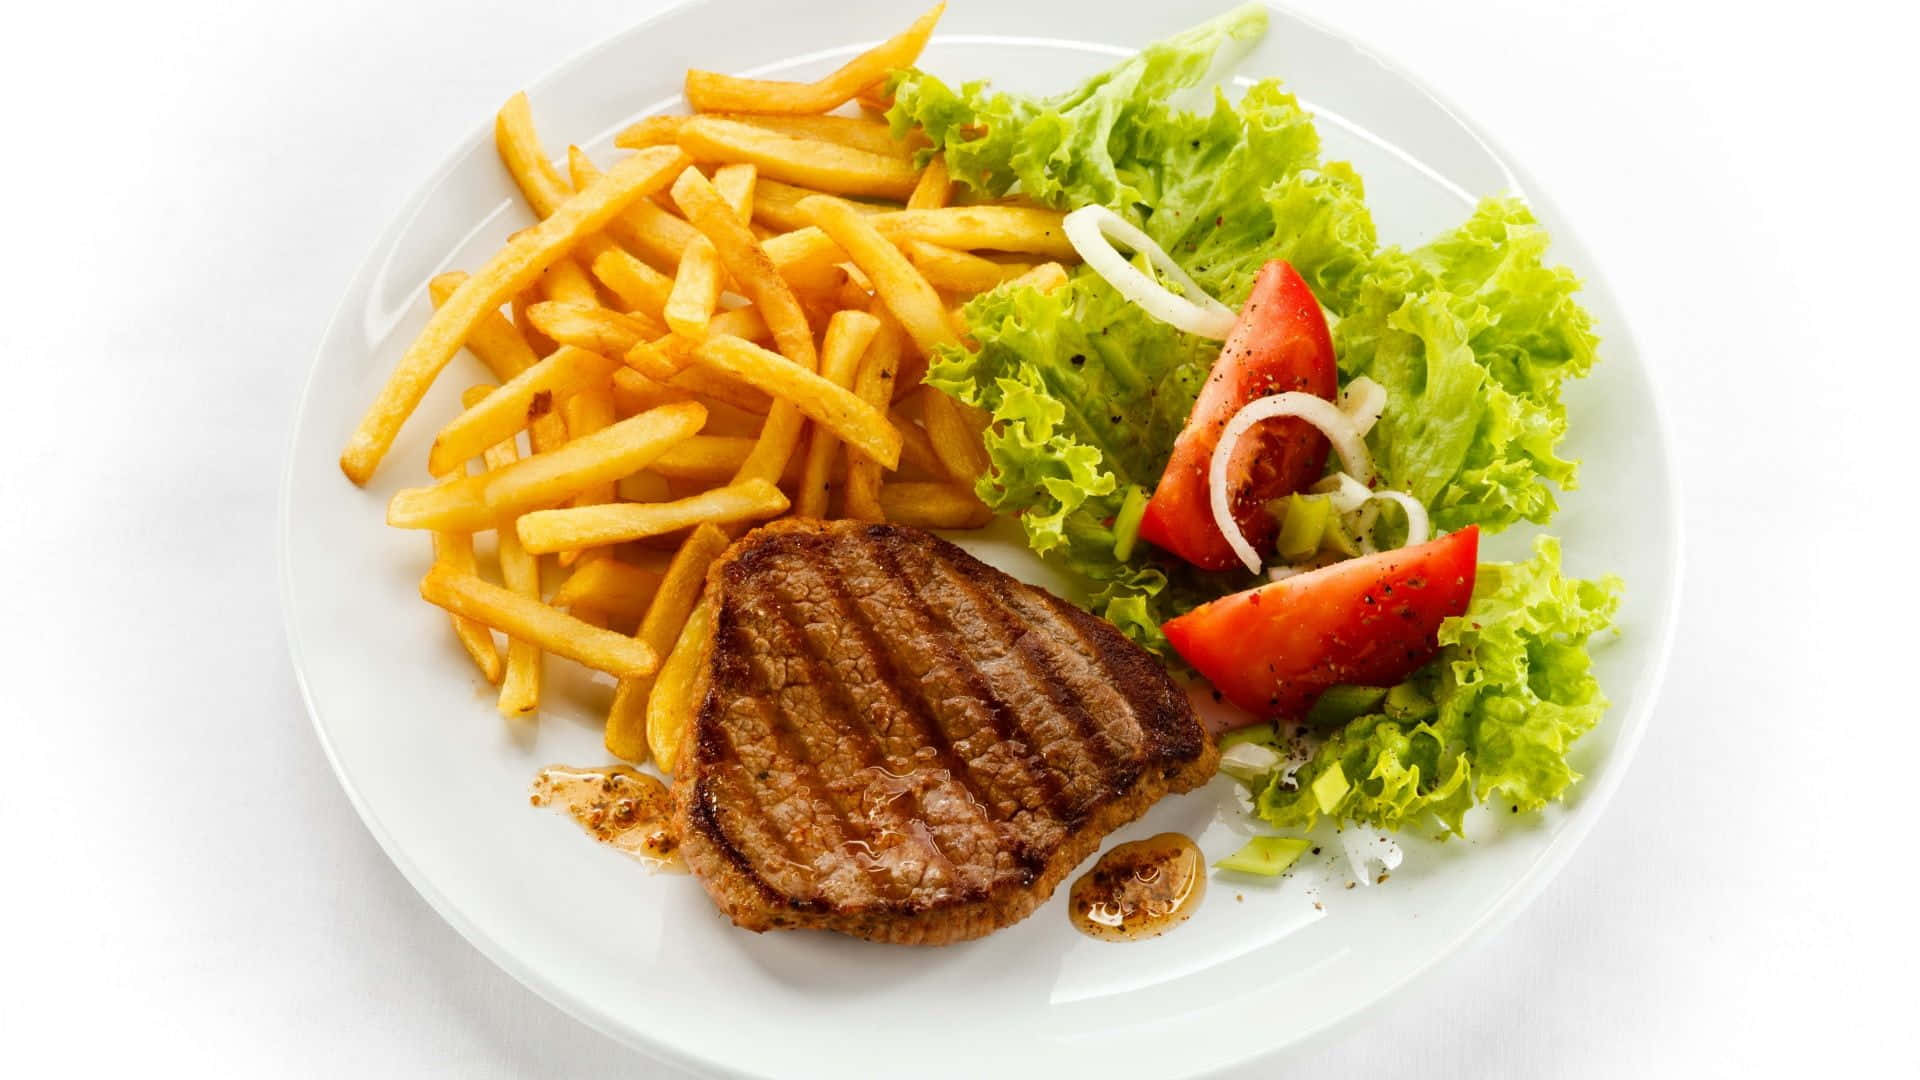 Plate With Steak, Fries And Salad